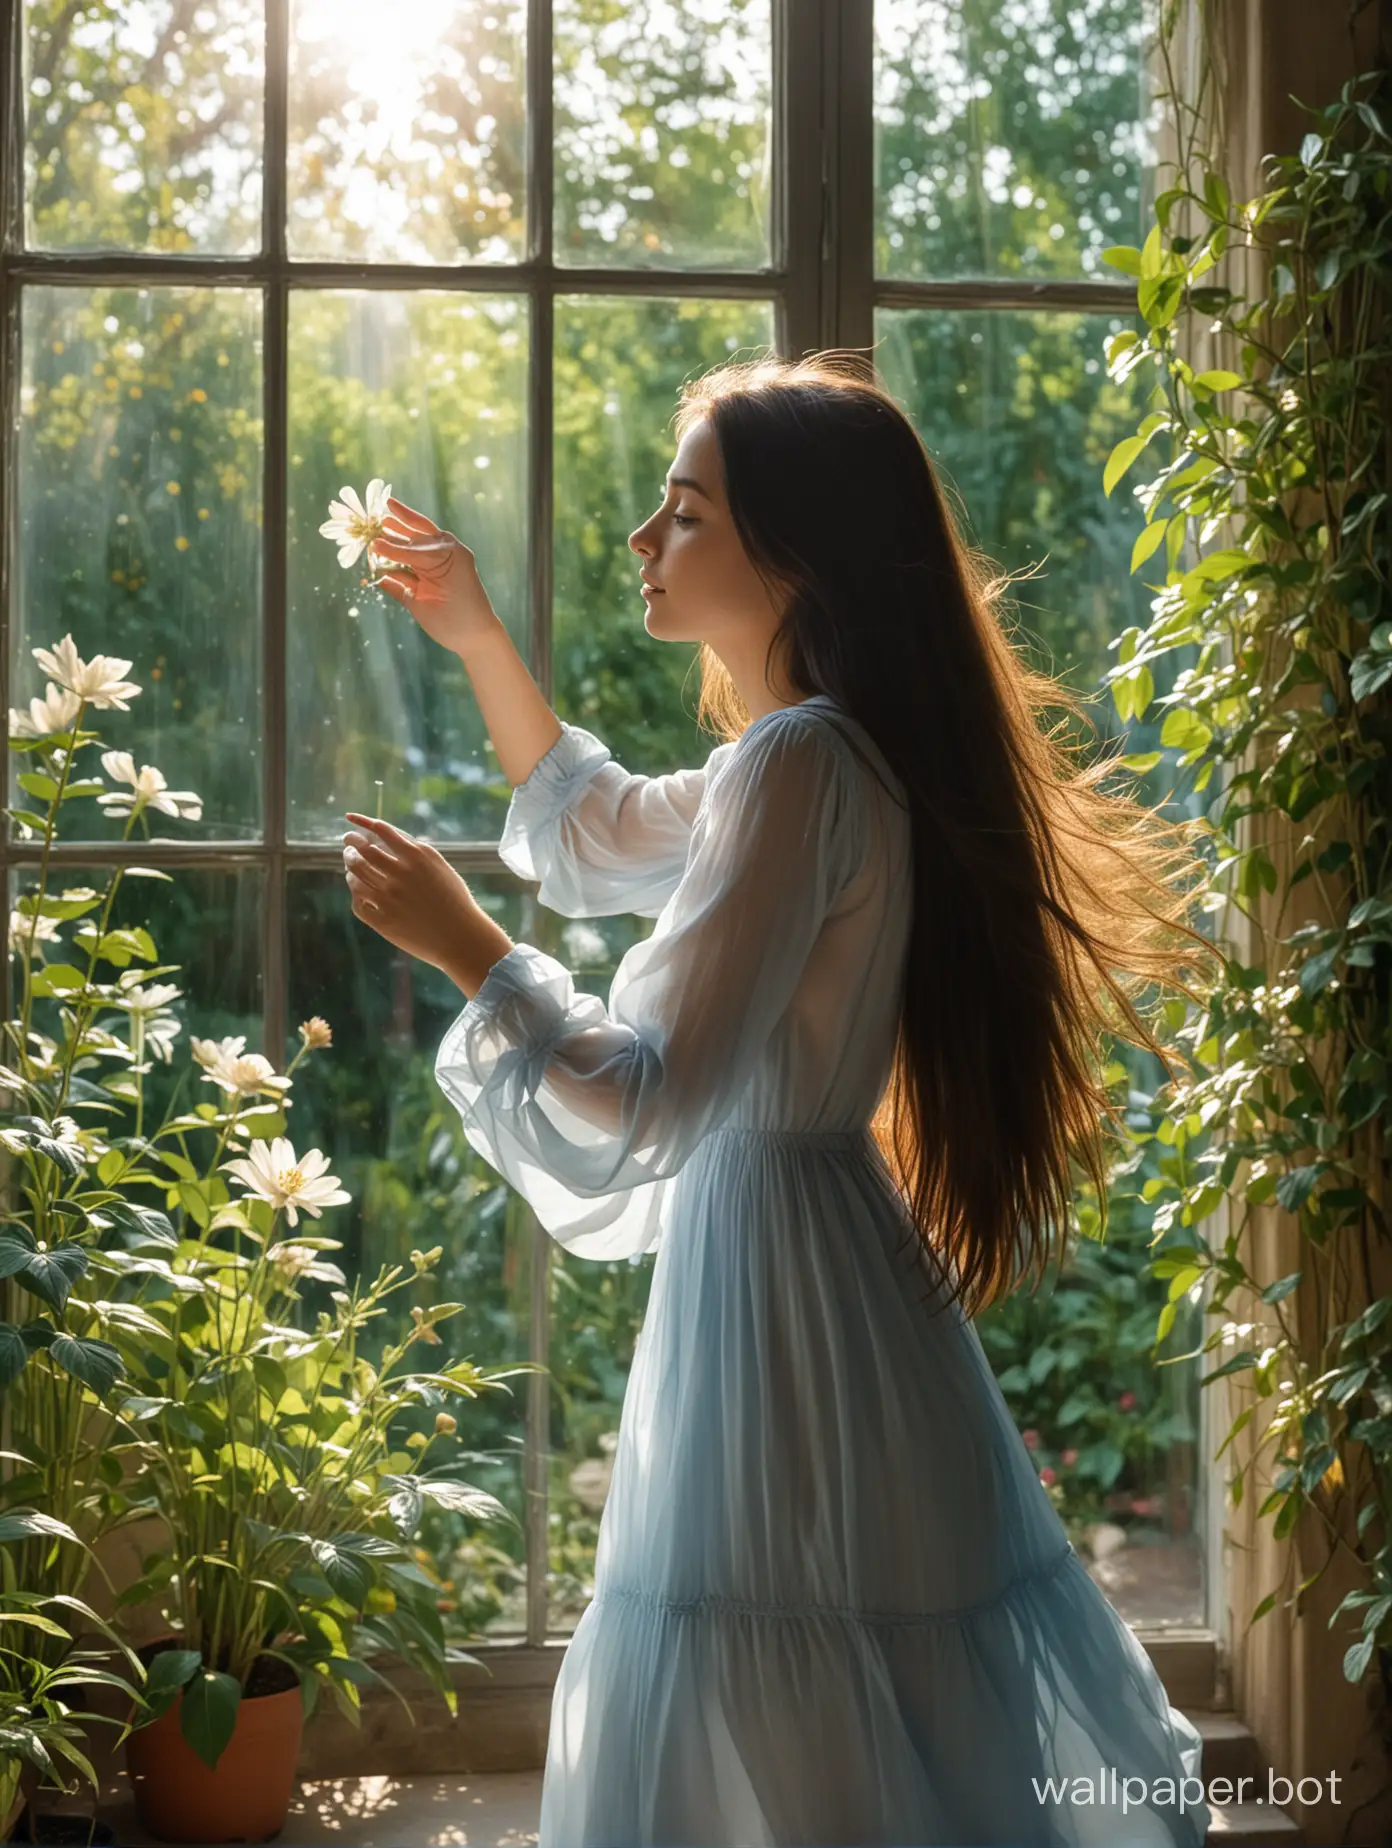 The girl stands in the botanical garden. The girl is 19 years old, with long straight dark hair. Her hair is gently swaying in the wind. With one hand, she reaches towards the flower. A ray of sunlight shines through the window glass onto her hair and clothes. She stands in profile and looks at the flower. She is dressed in a light, delicate blue dress.